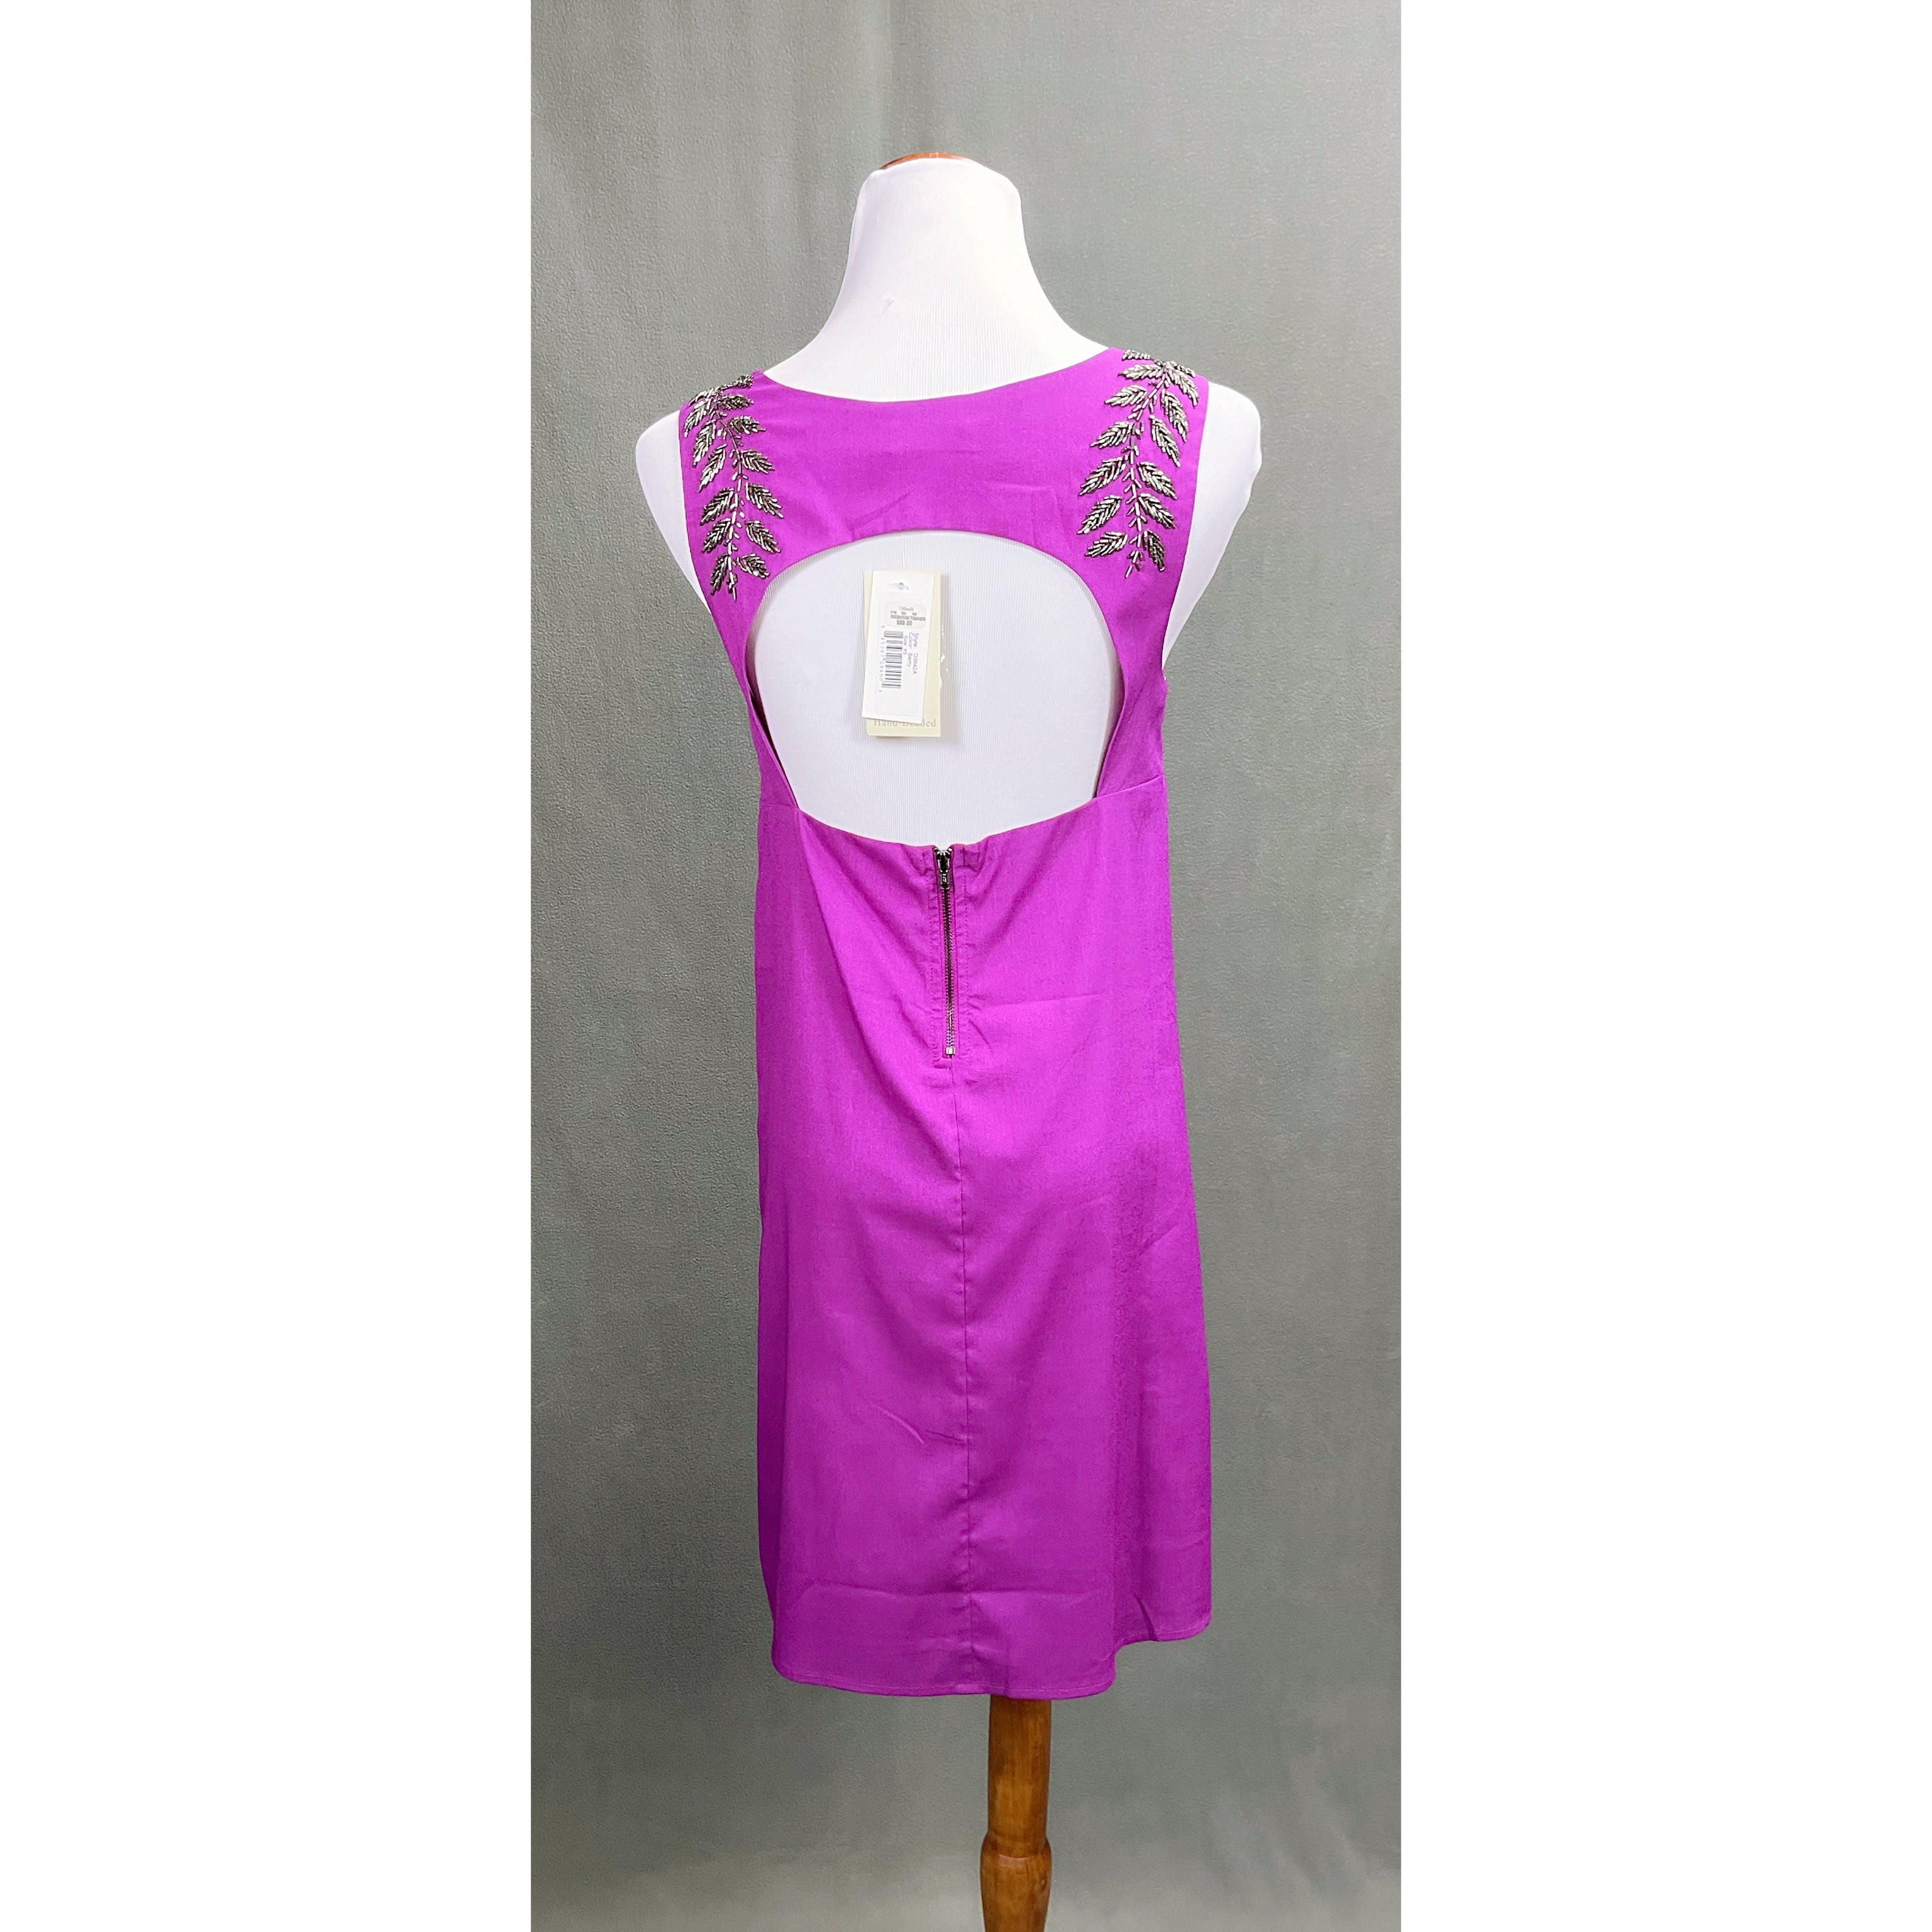 Sugar Lips magenta dress, size XS, NEW WITH TAGS!